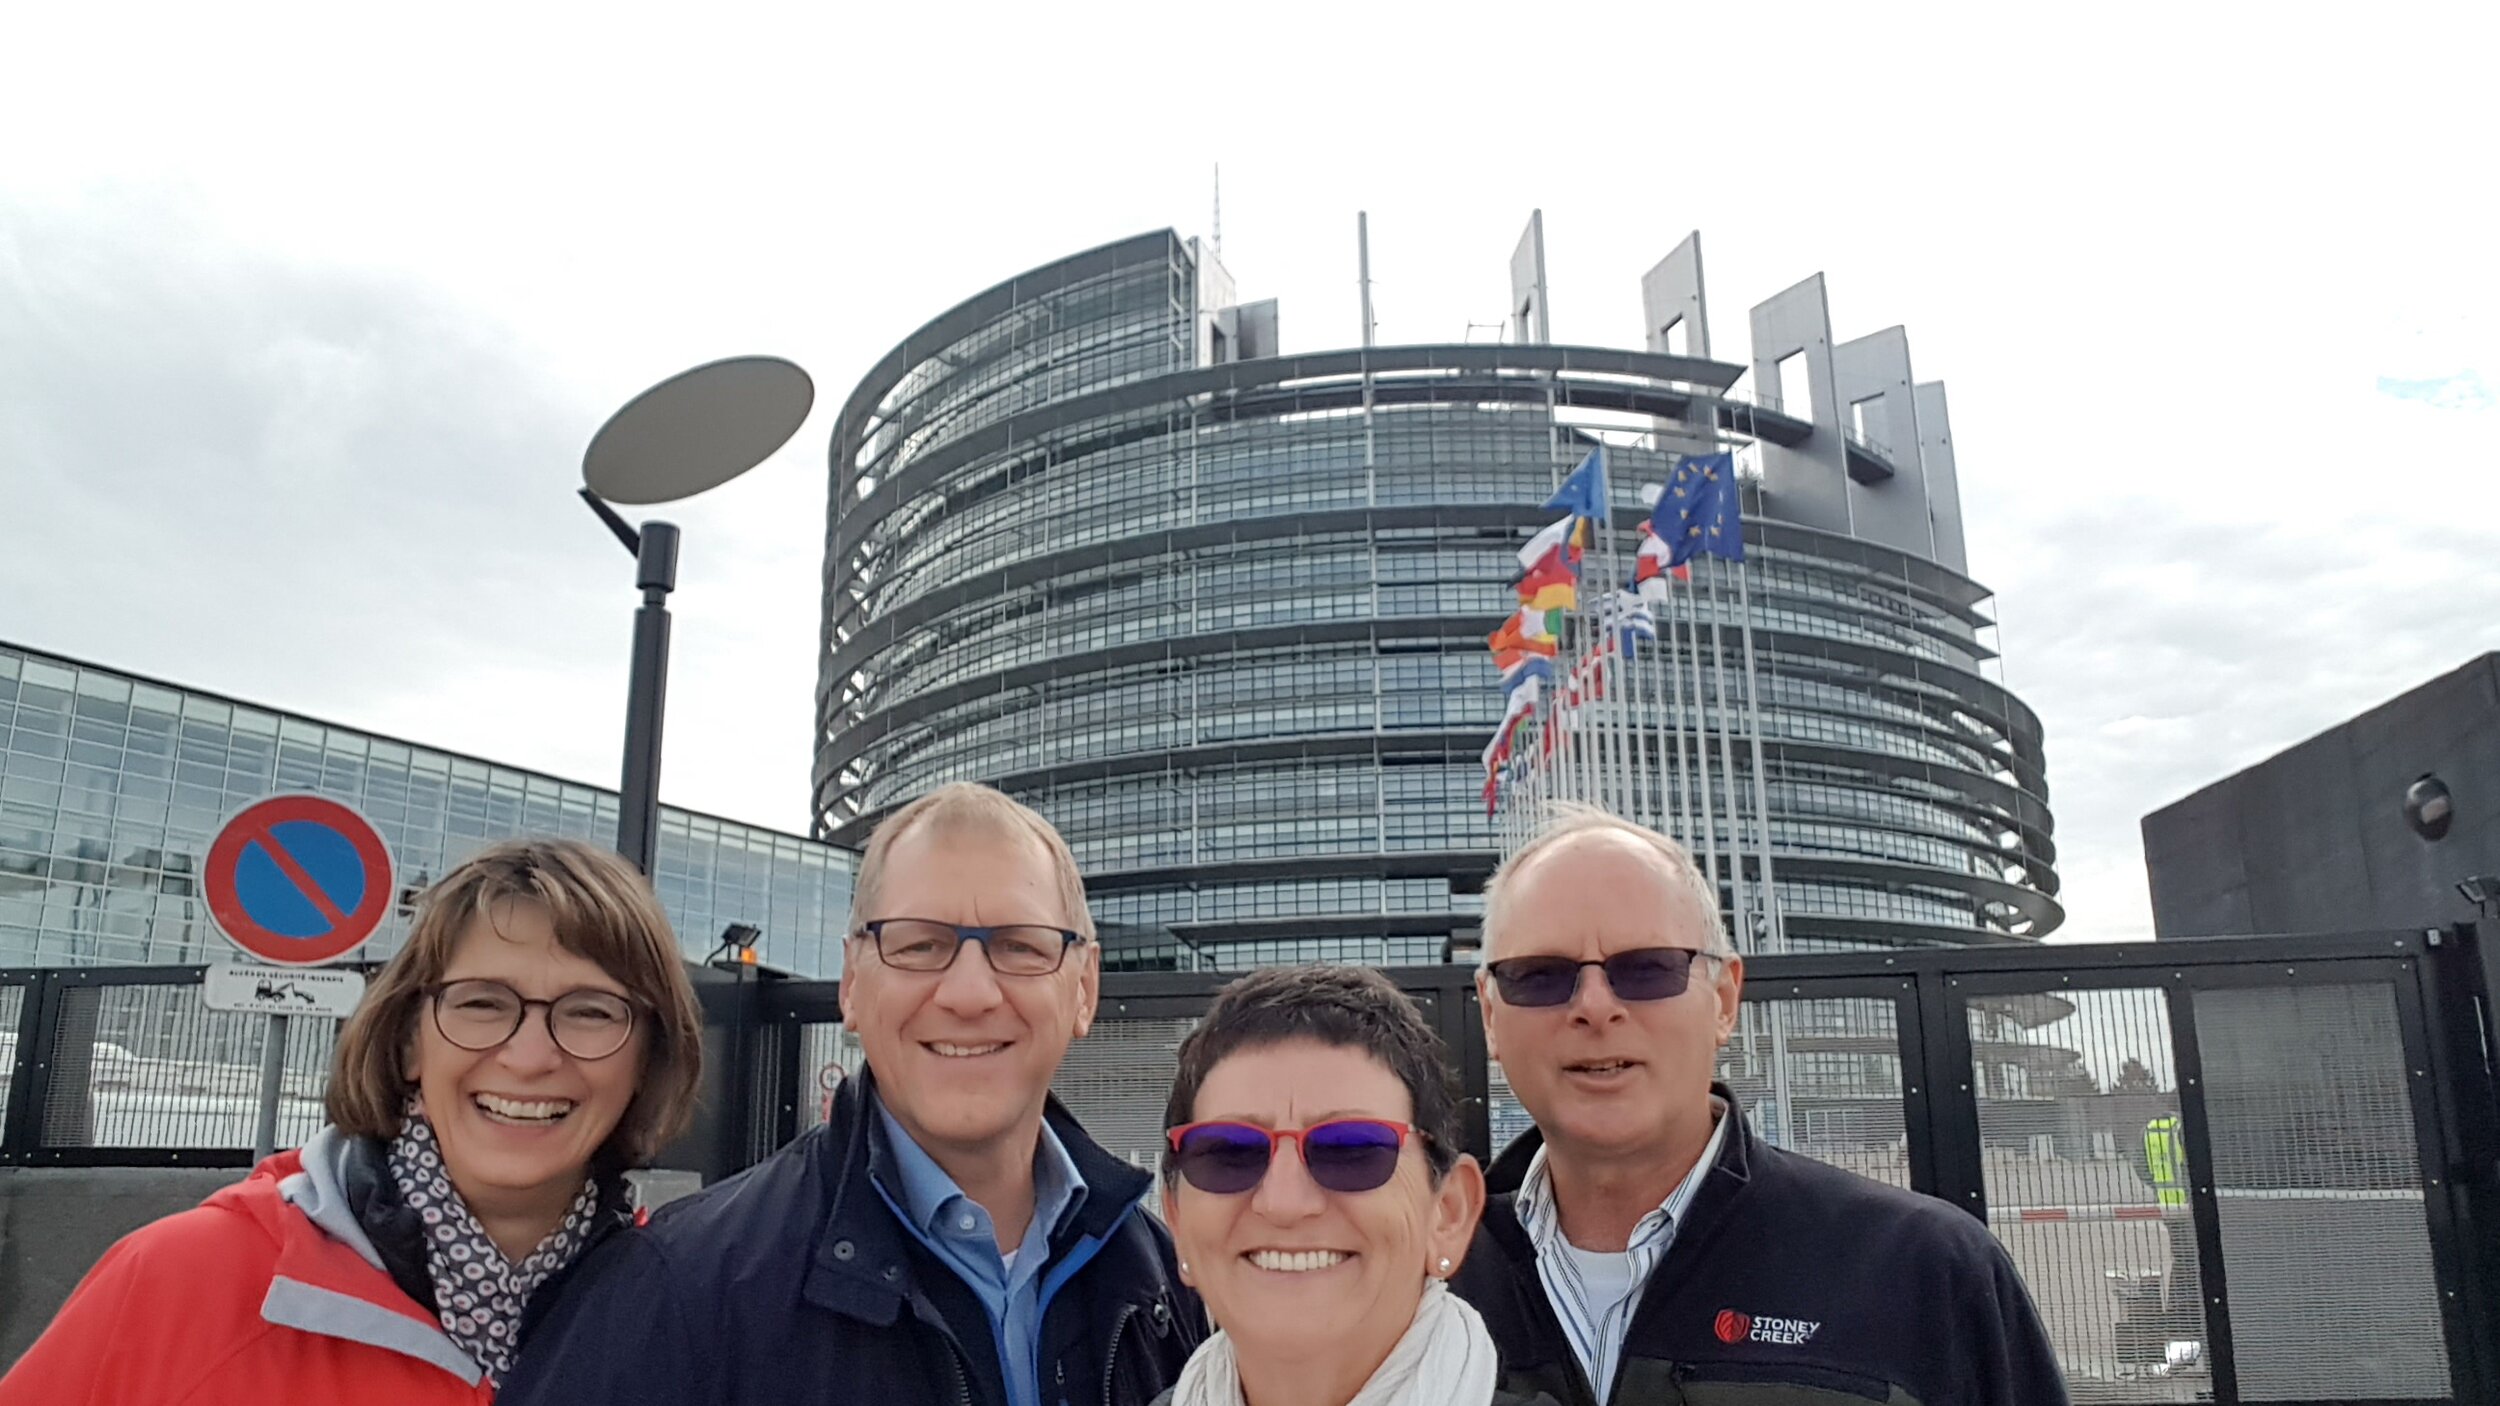 Marion, Helmut, Francien and Frank in front of European Parliament in Strassburg